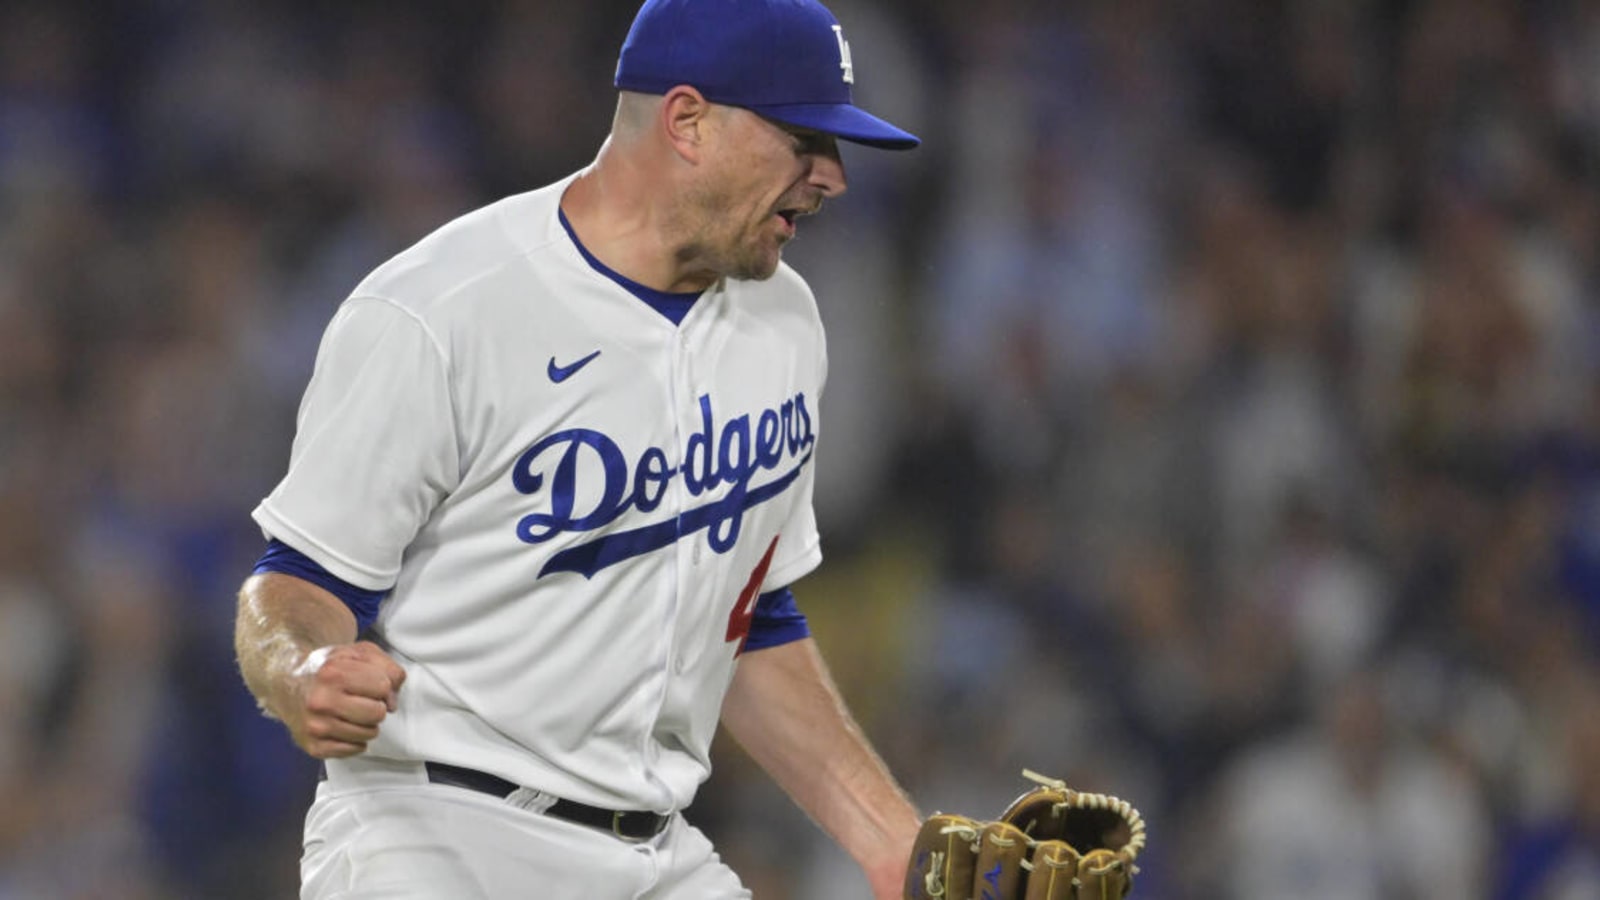 Dodgers Injured Reliever Believes He Can Help the Team Win a World Series This Season